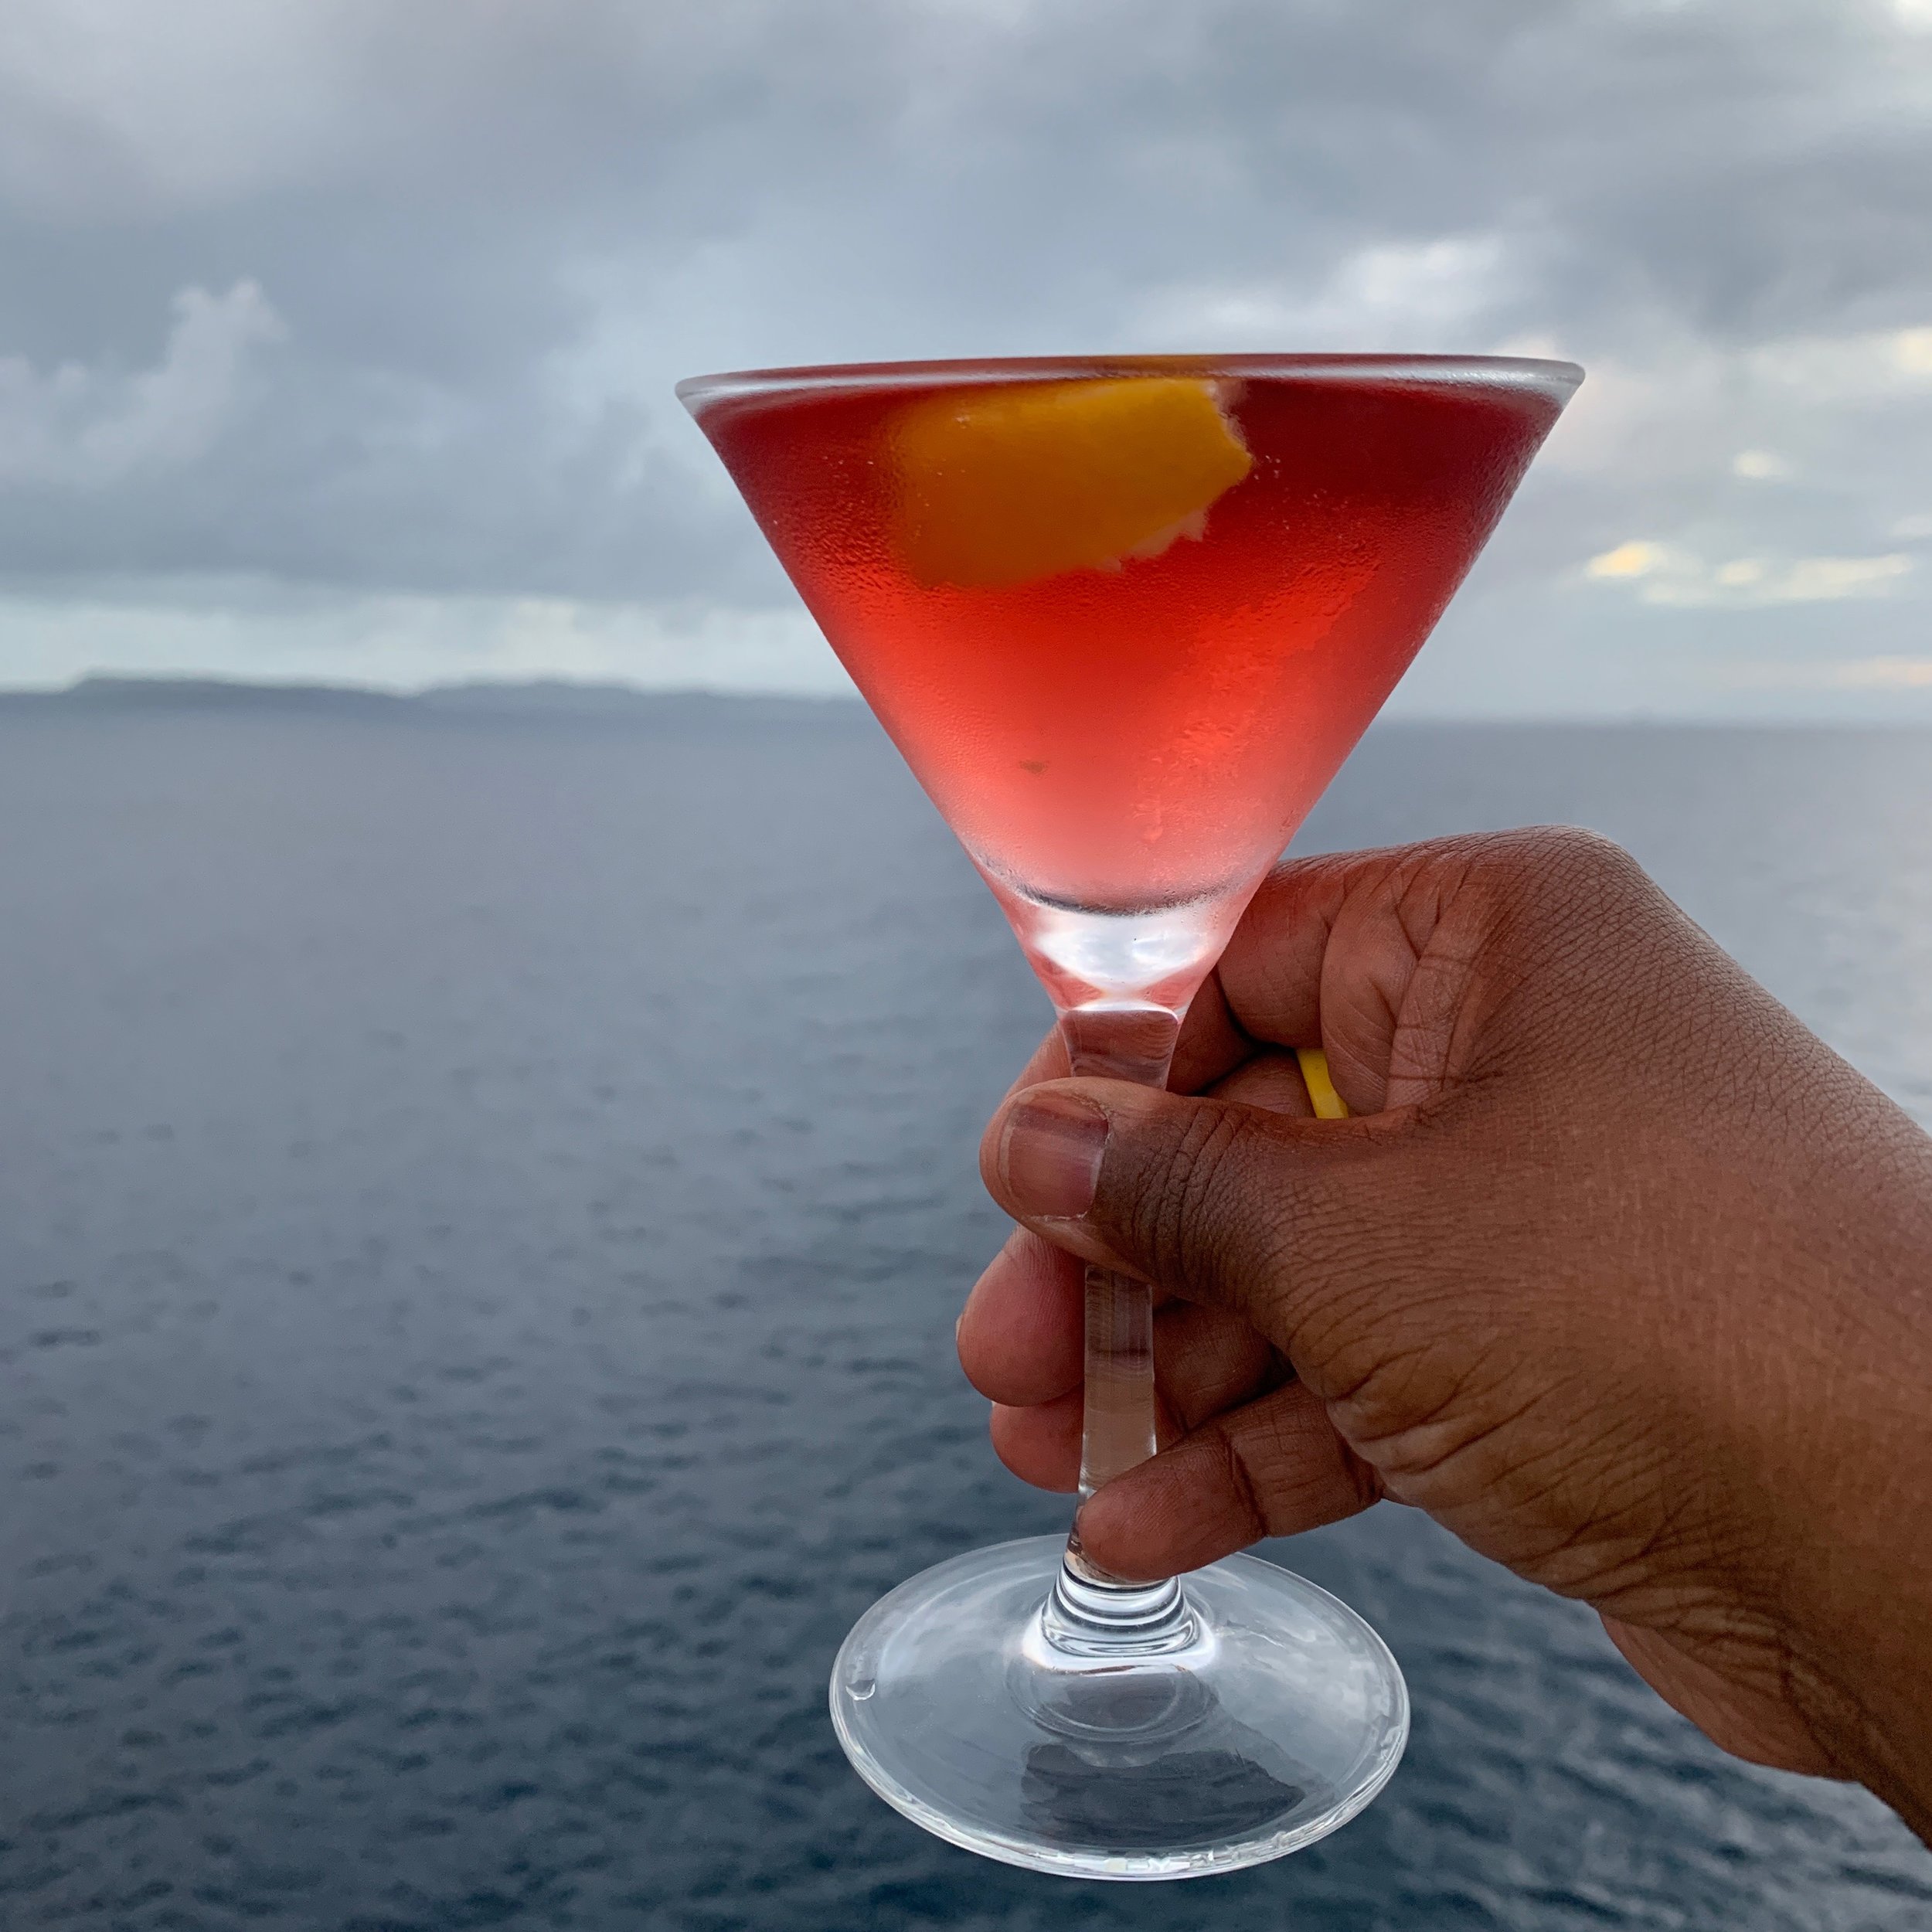 Because cocktails and cruising are a winning combination!